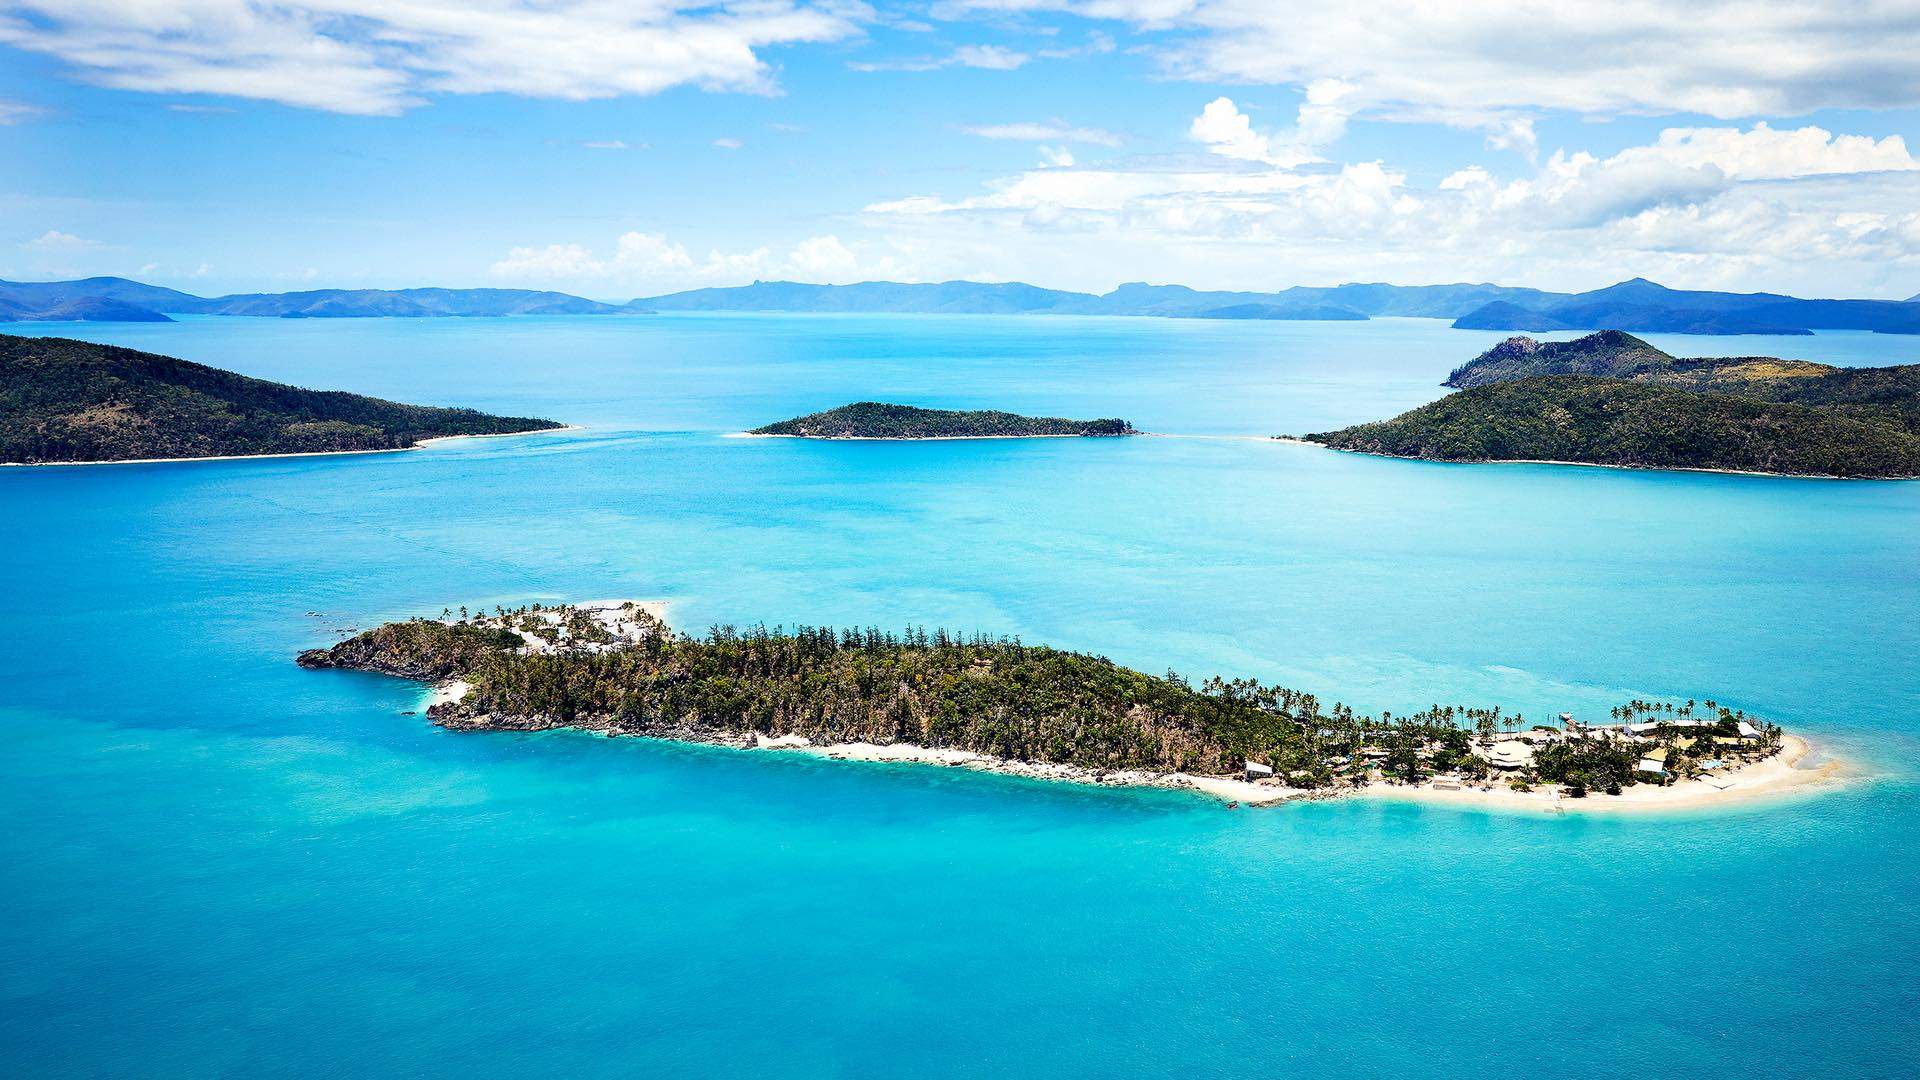 The Whitsundays' Luxury Daydream Island Resort Has Reopened After a $100 Million Refurb